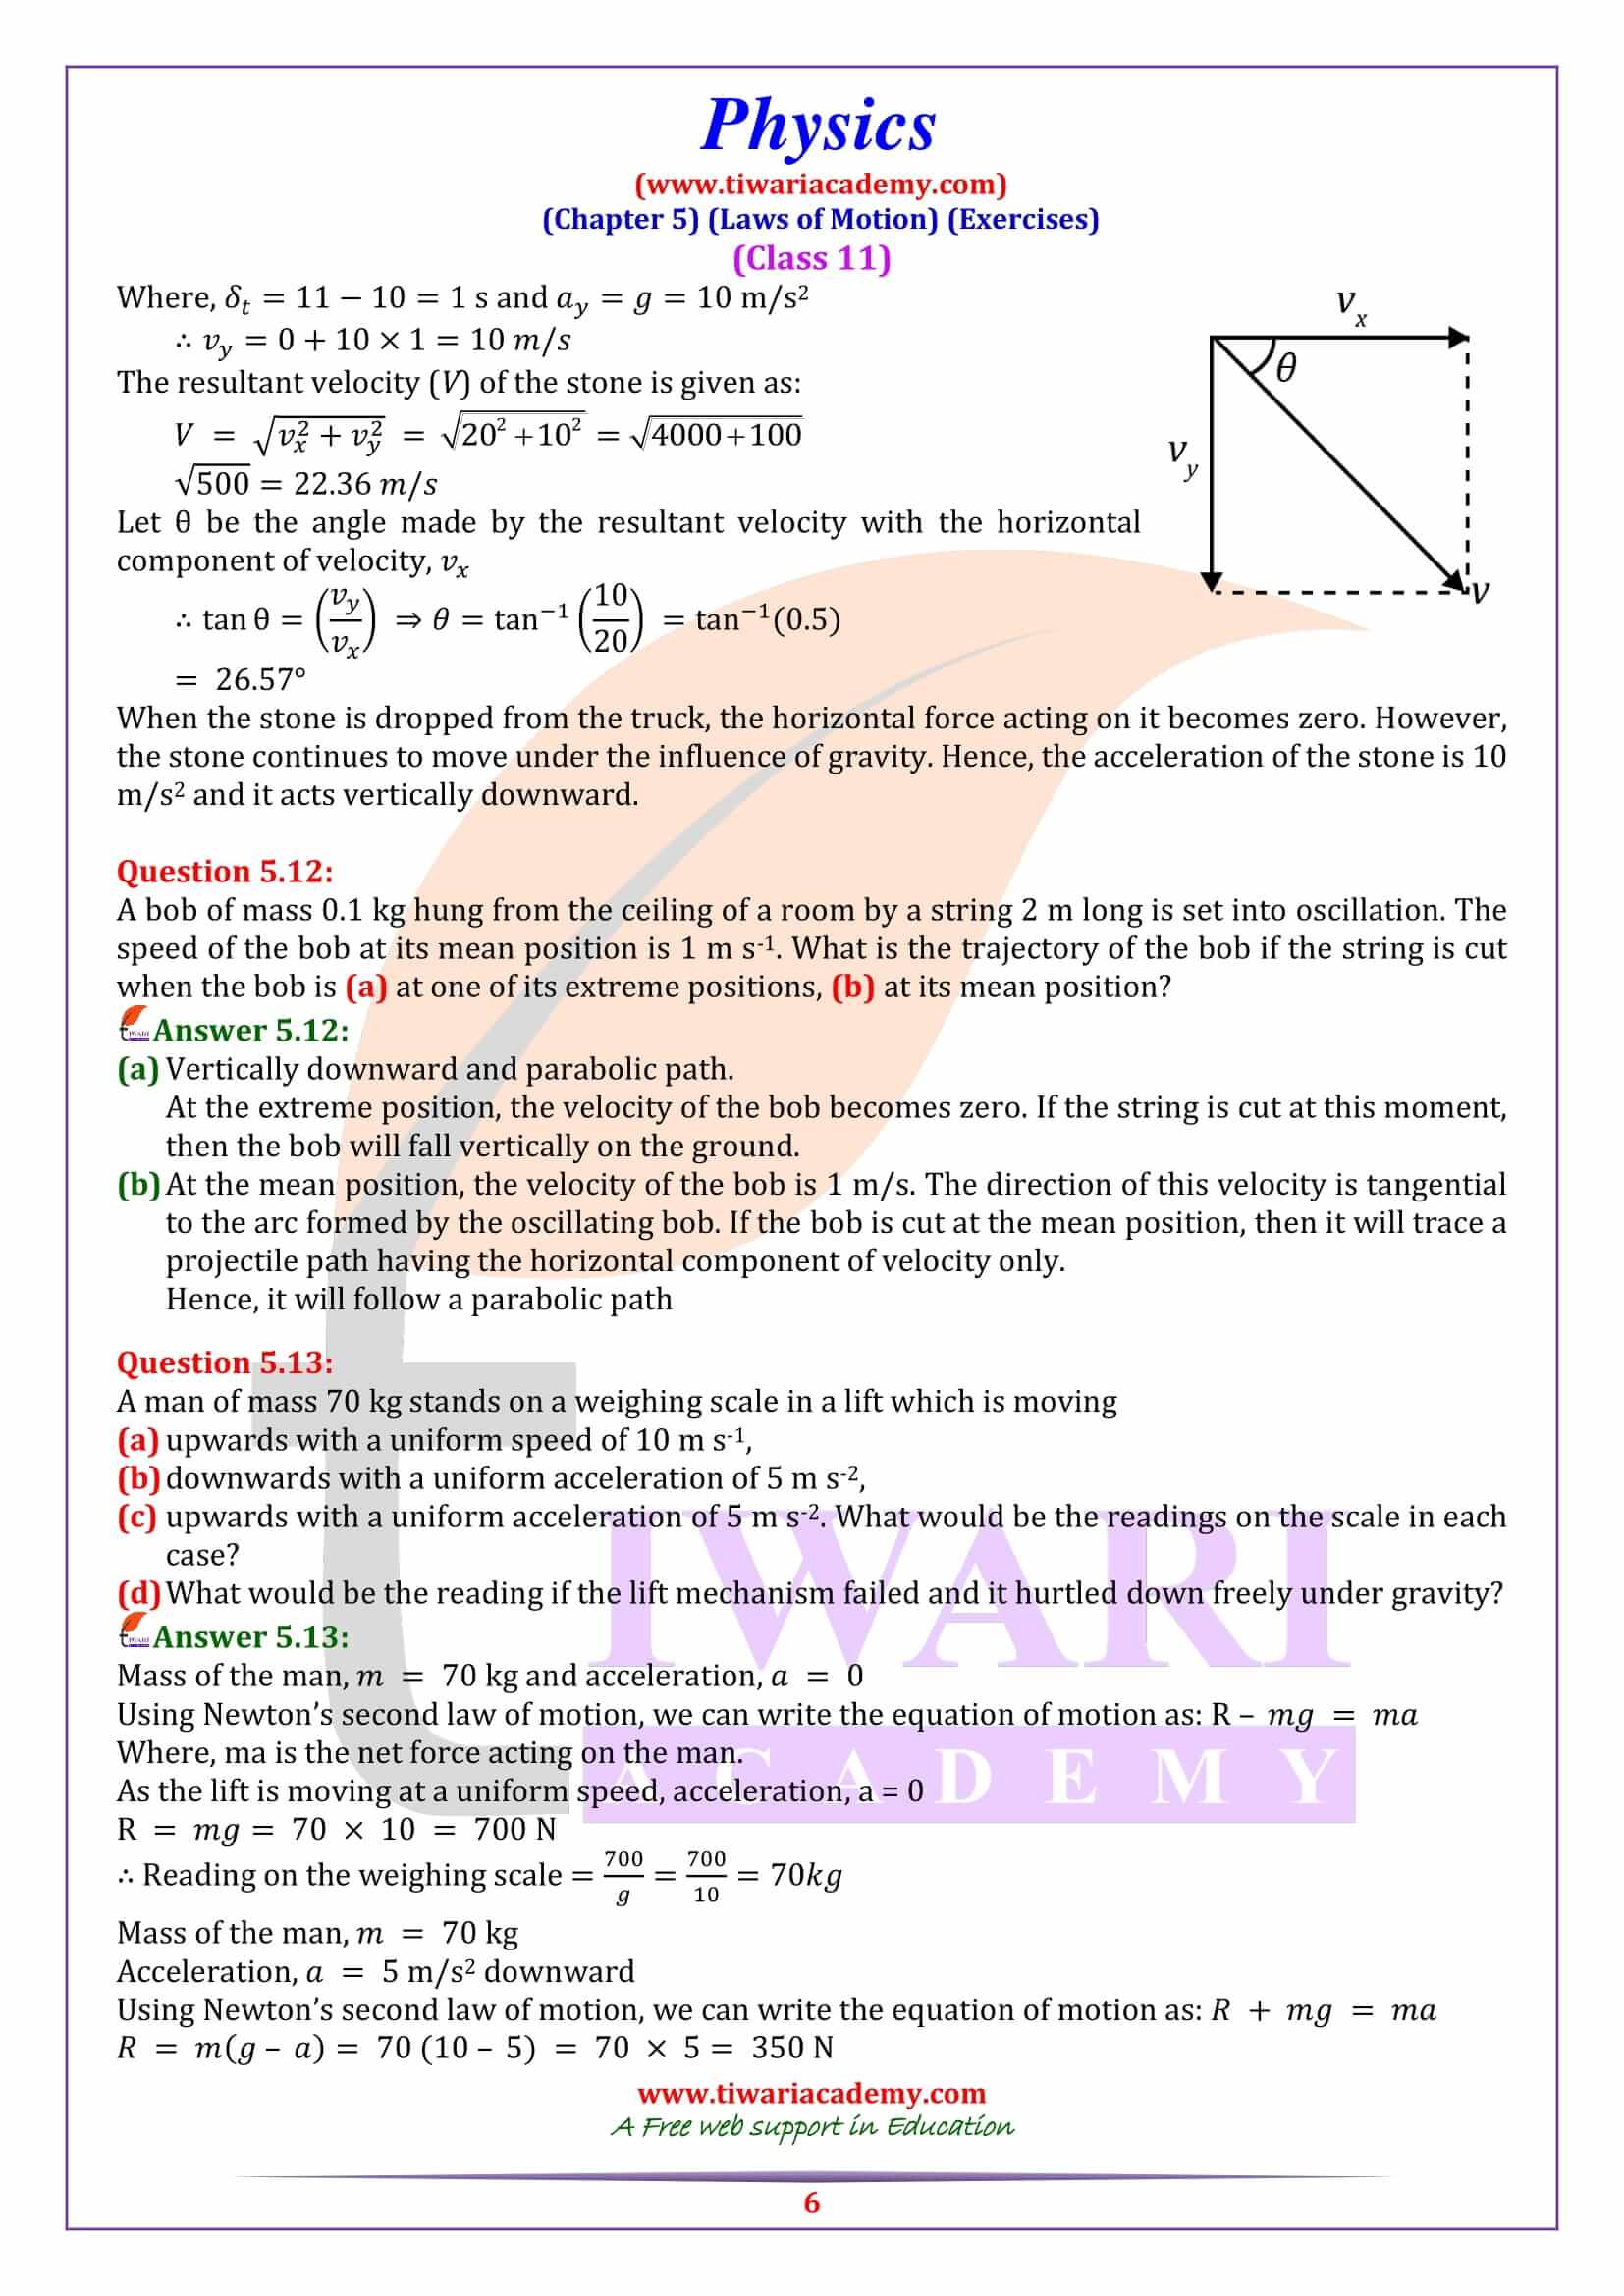 Class 11 Physics Chapter 5 Question Answers in English